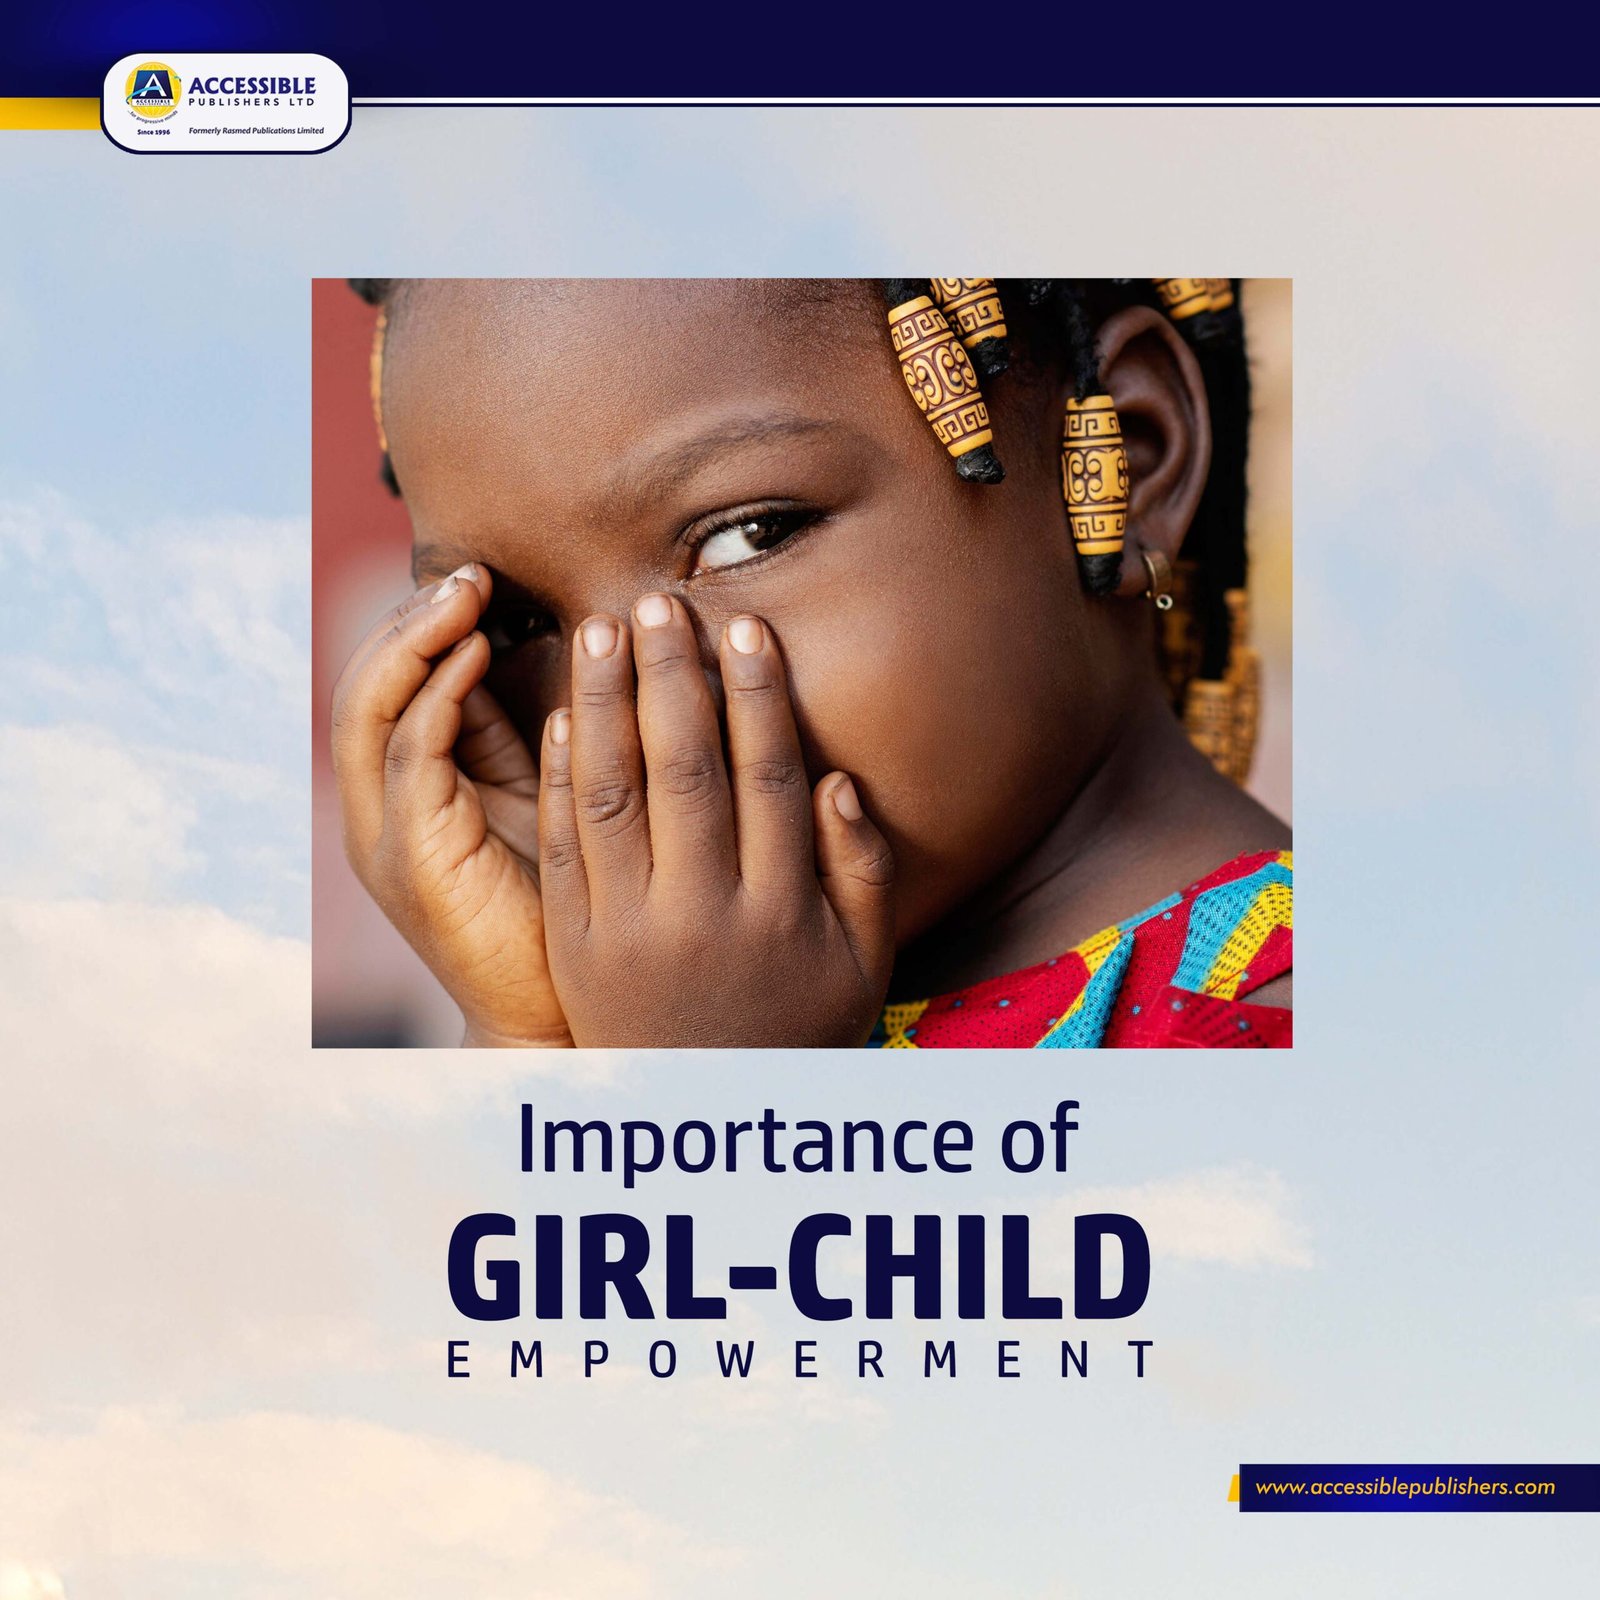 Importance of girl-child empowerment